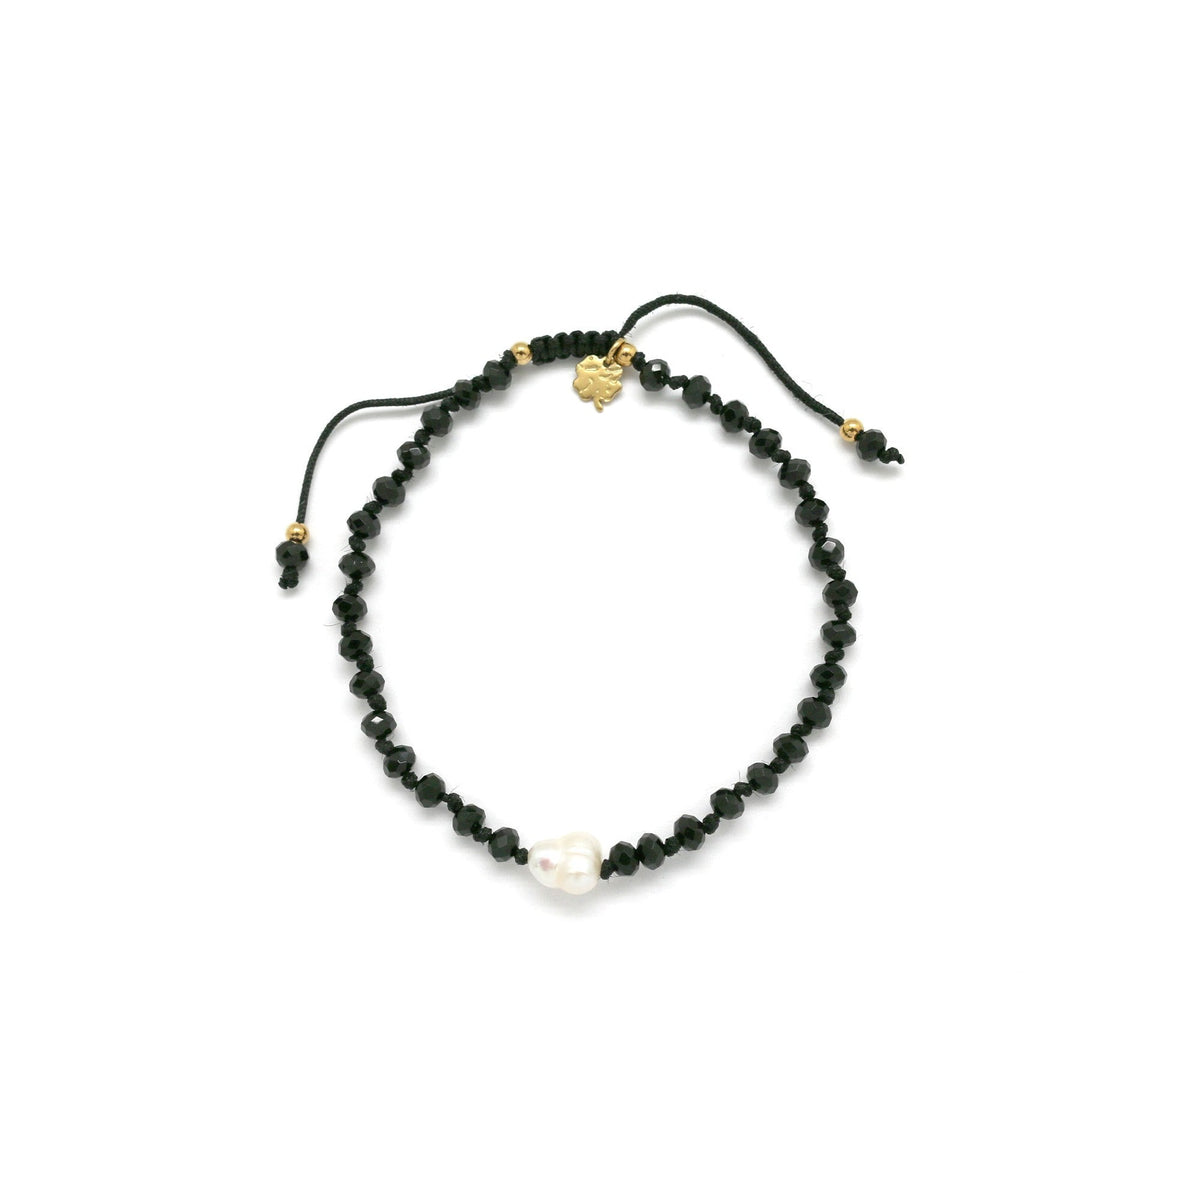 Adjustable onyx bracelet with water pearl